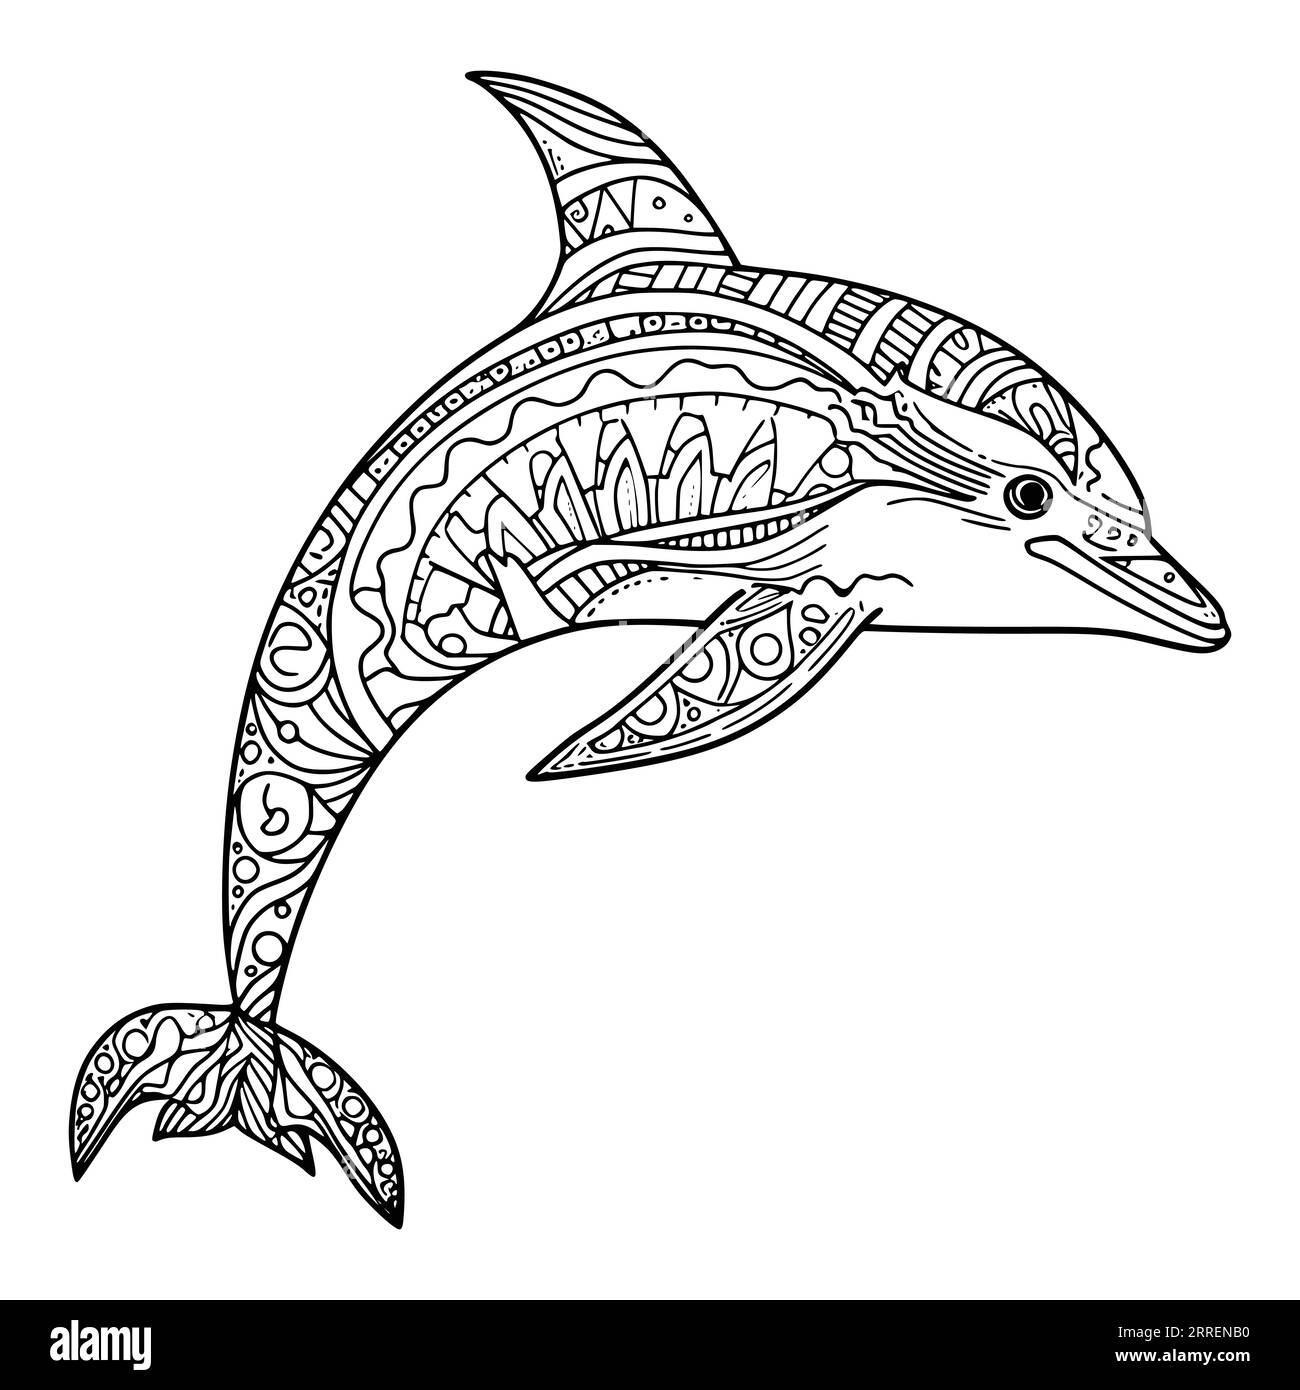 Zentangle Dolphin Coloring Page for Kids Stock Vector